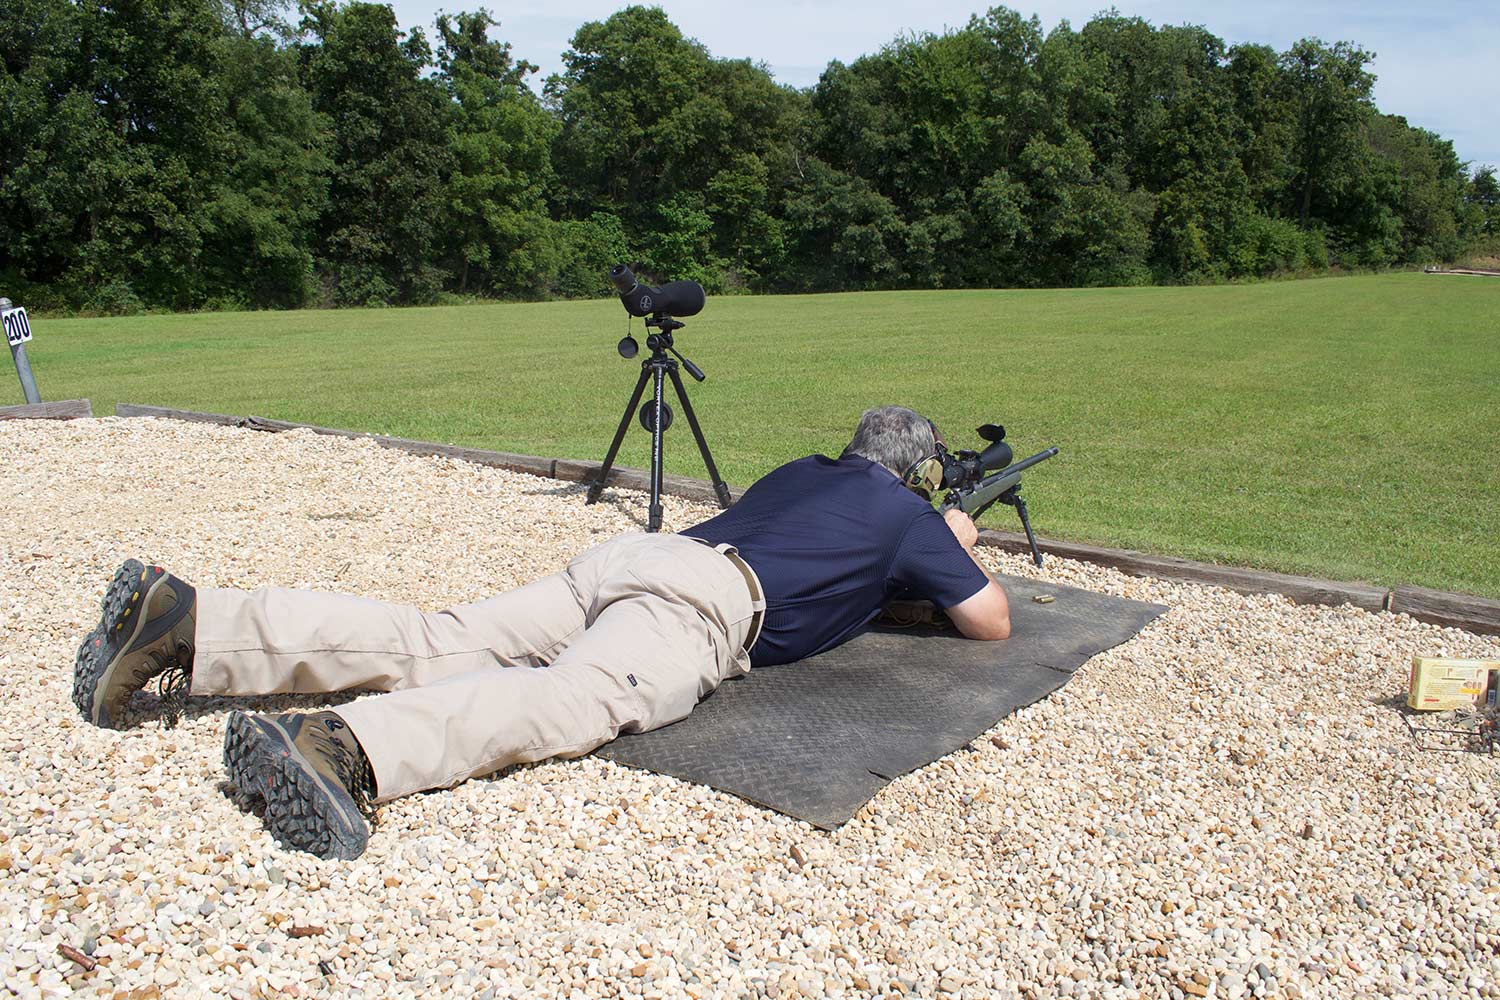 A man laying prostrate on the ground while aiming a rifle using bipods.